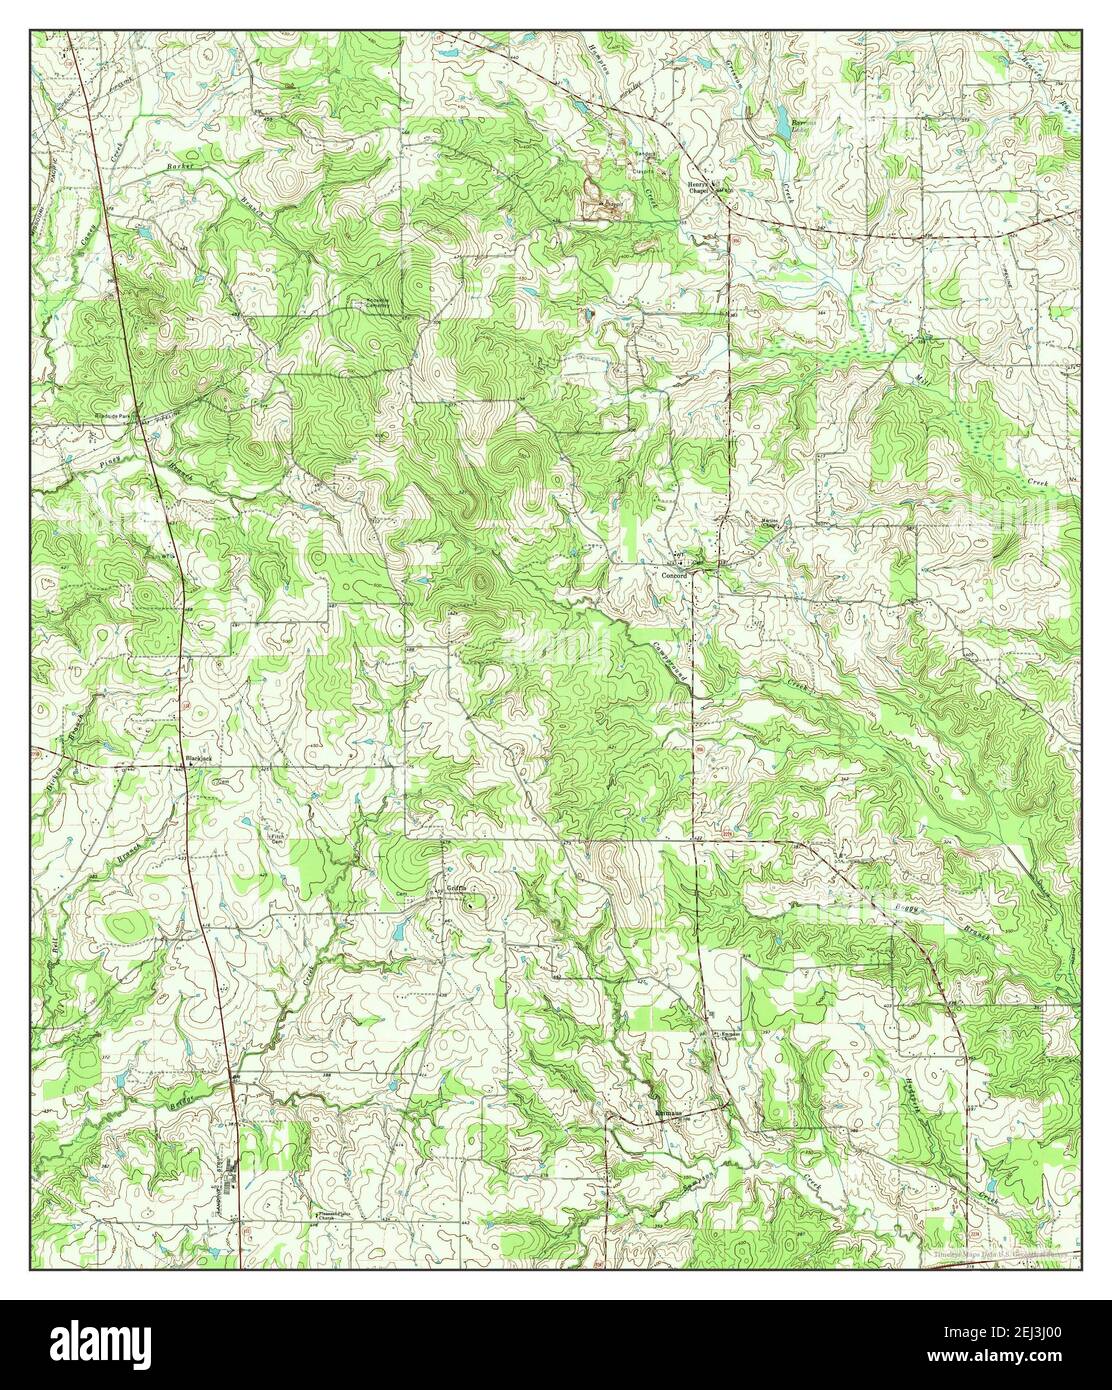 Griffin, Texas, map 1973, 1:24000, United States of America by Timeless Maps, data U.S. Geological Survey Stock Photo